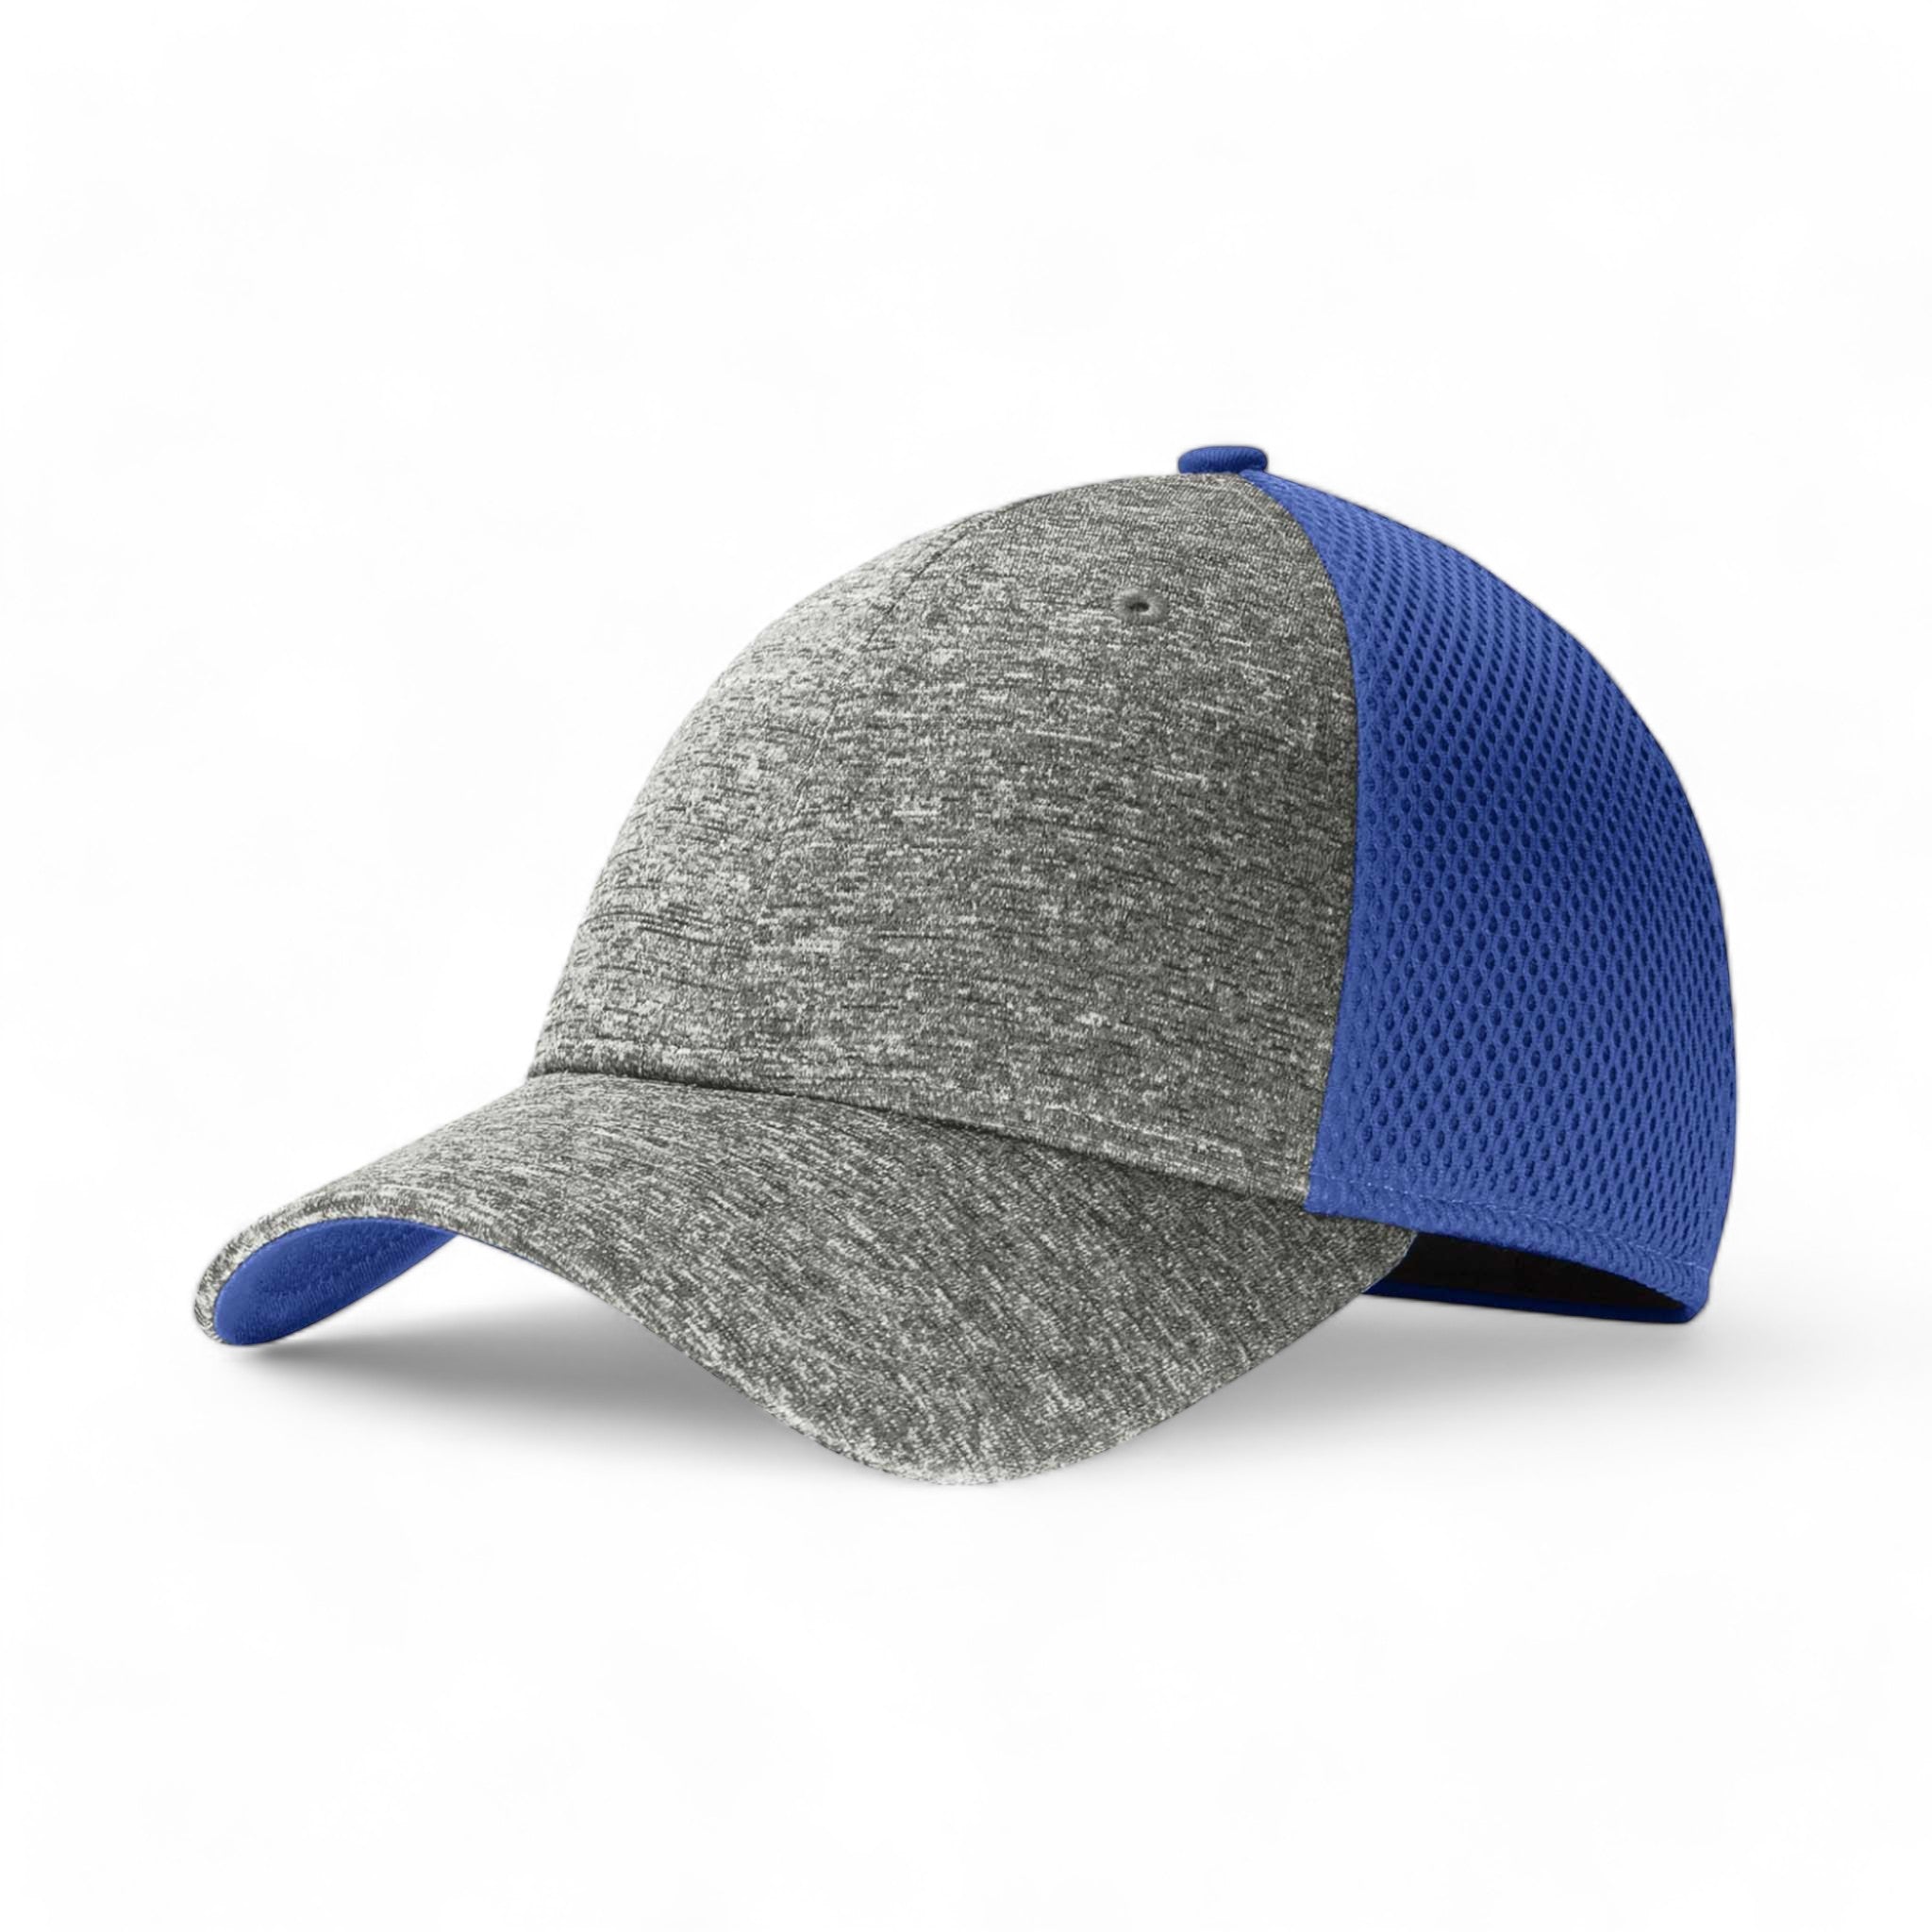 Side view of New Era NE702 custom hat in royal and shadow heather